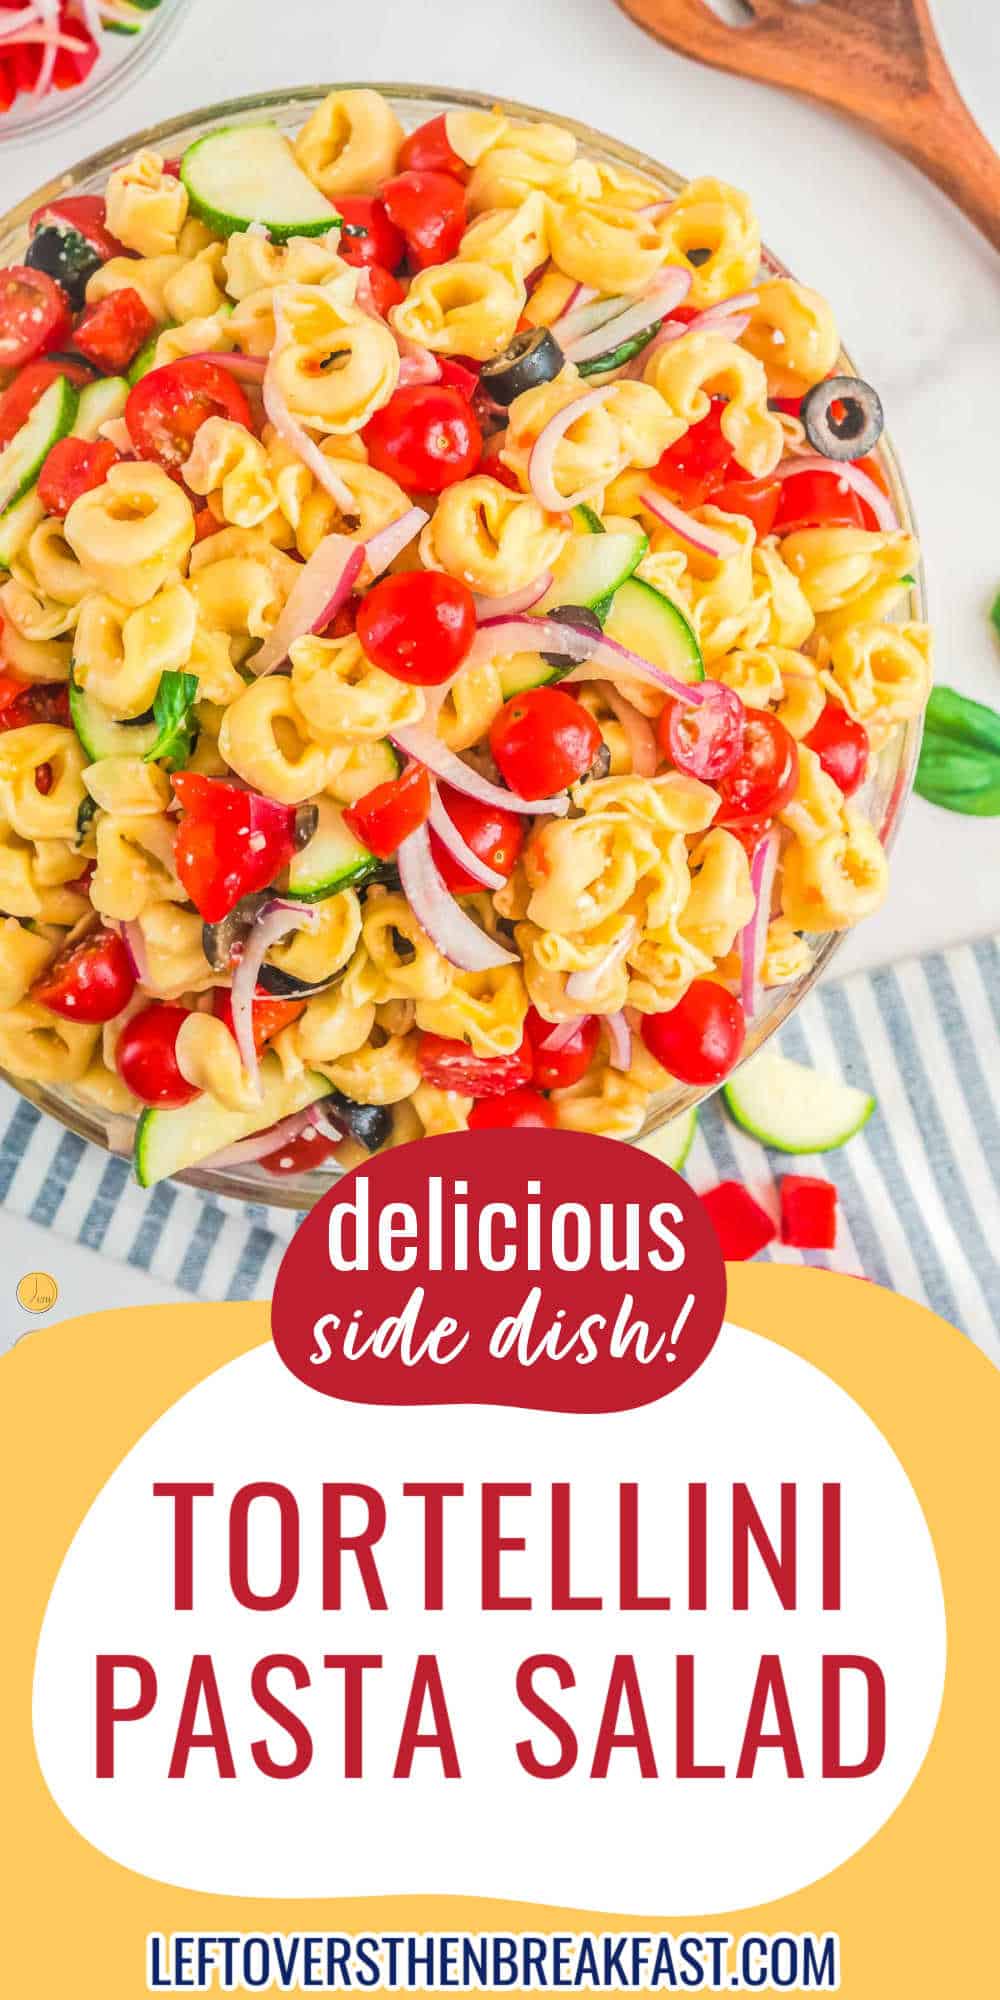 delicious side dish with yellow banner and red text